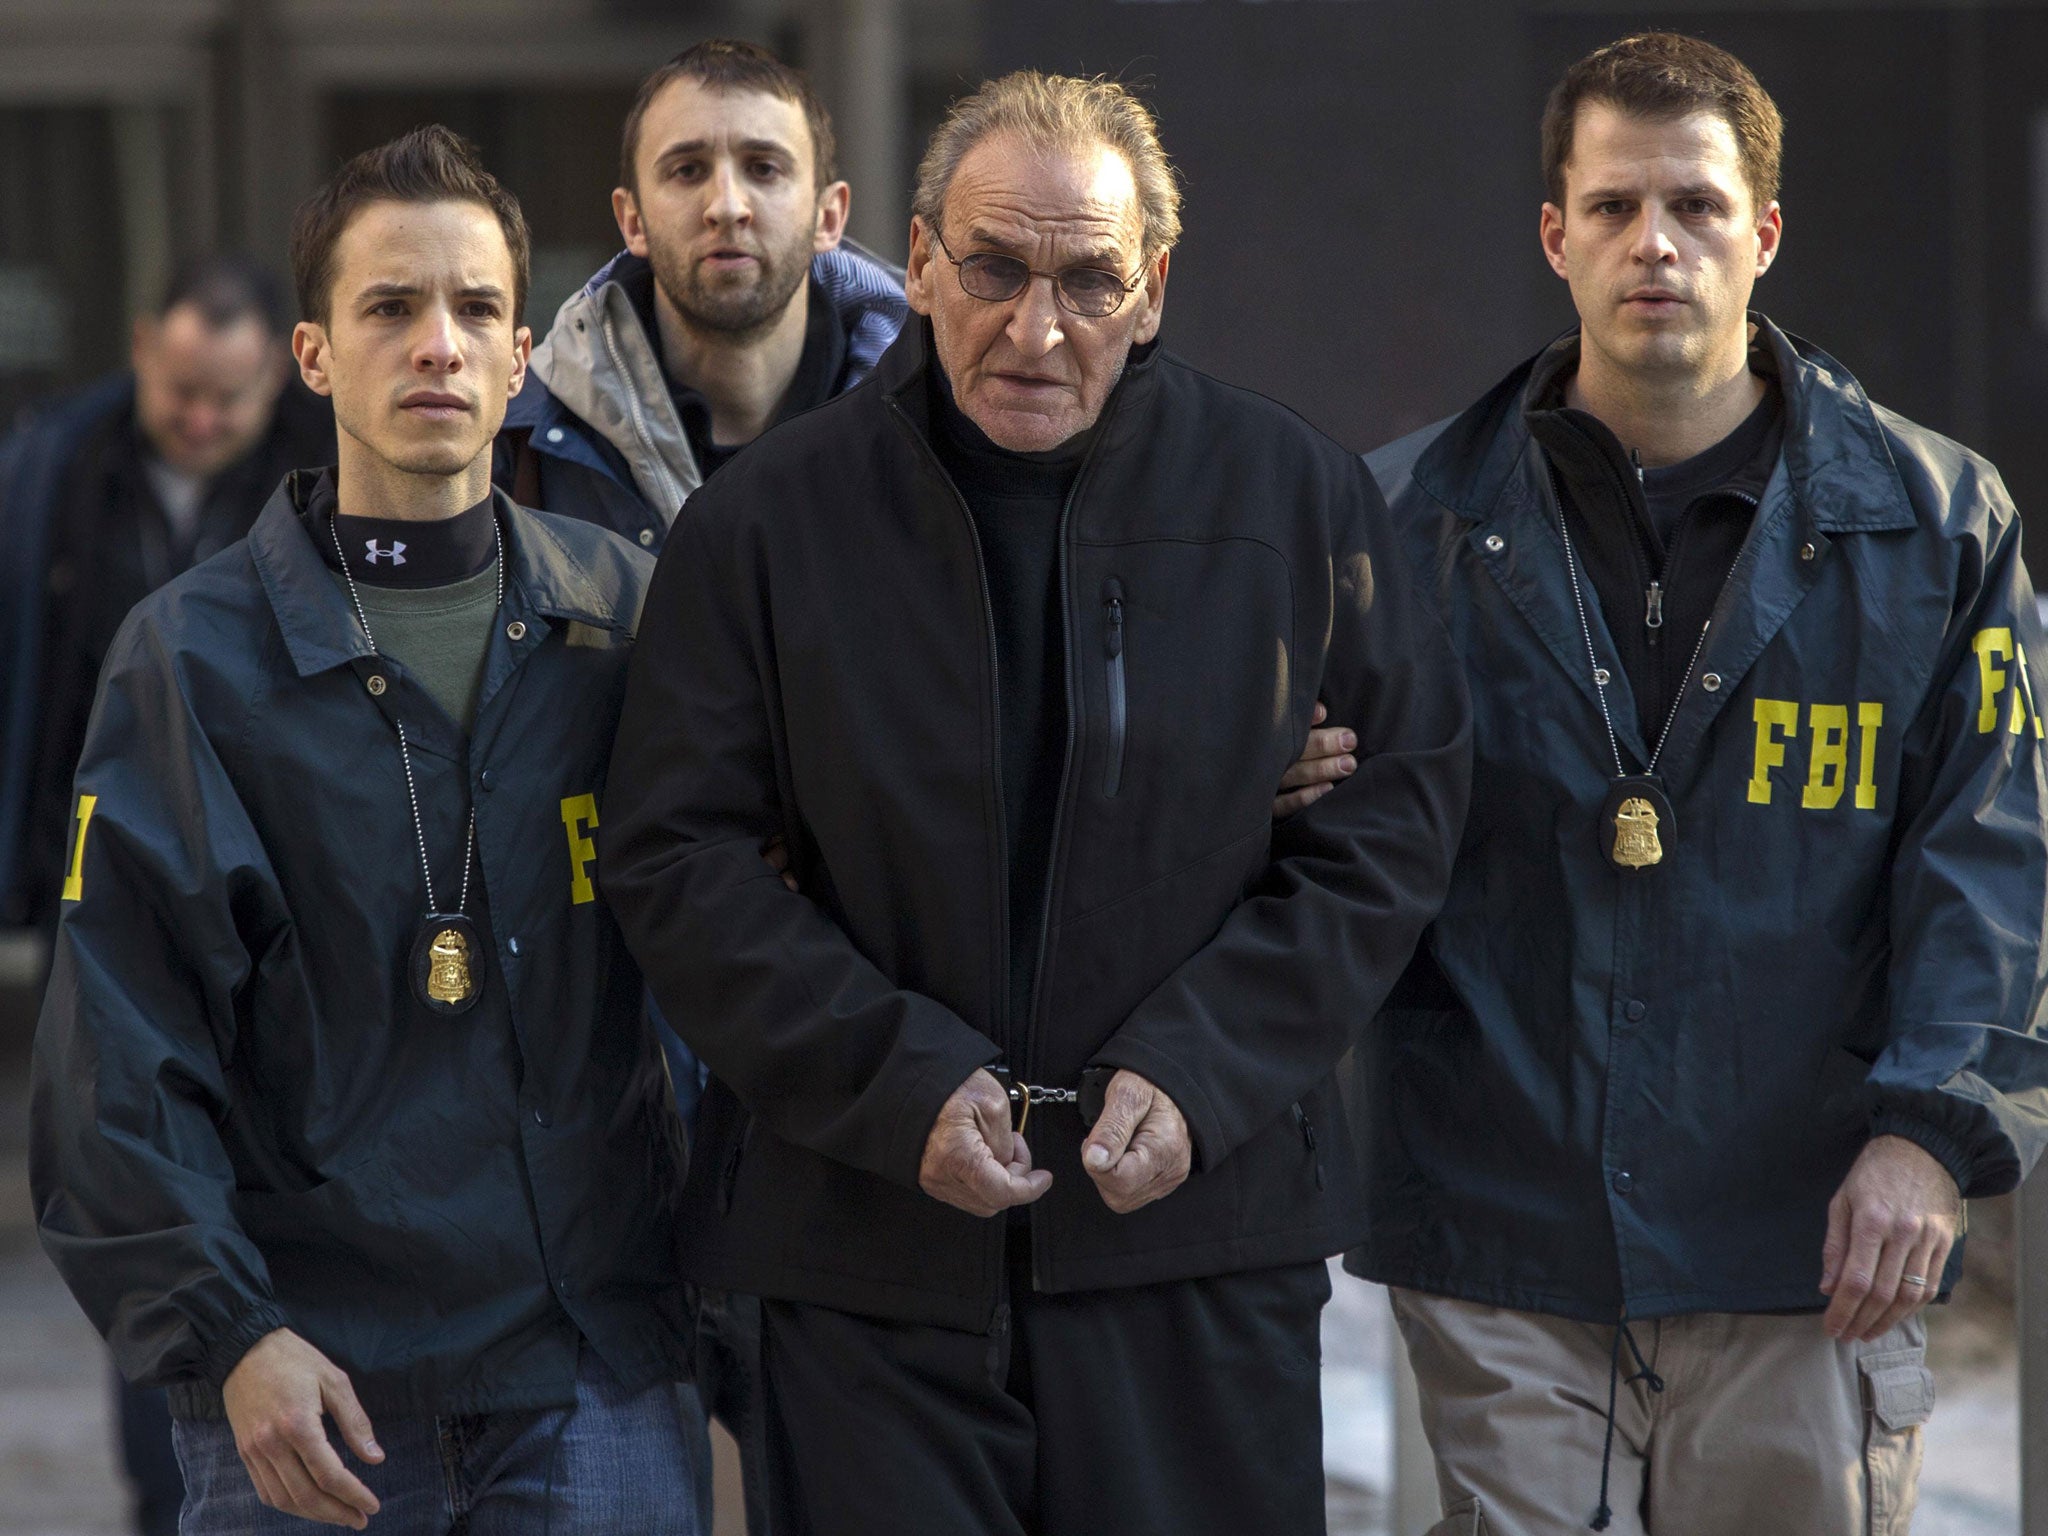 Bonanno crime family leader Vincent Asaro is escorted by FBI agents; the Bonanno crime family committed acts of extortion and arson, including the airport heist, a brazen crime made famous by the 1990 film 'Goodfellas'